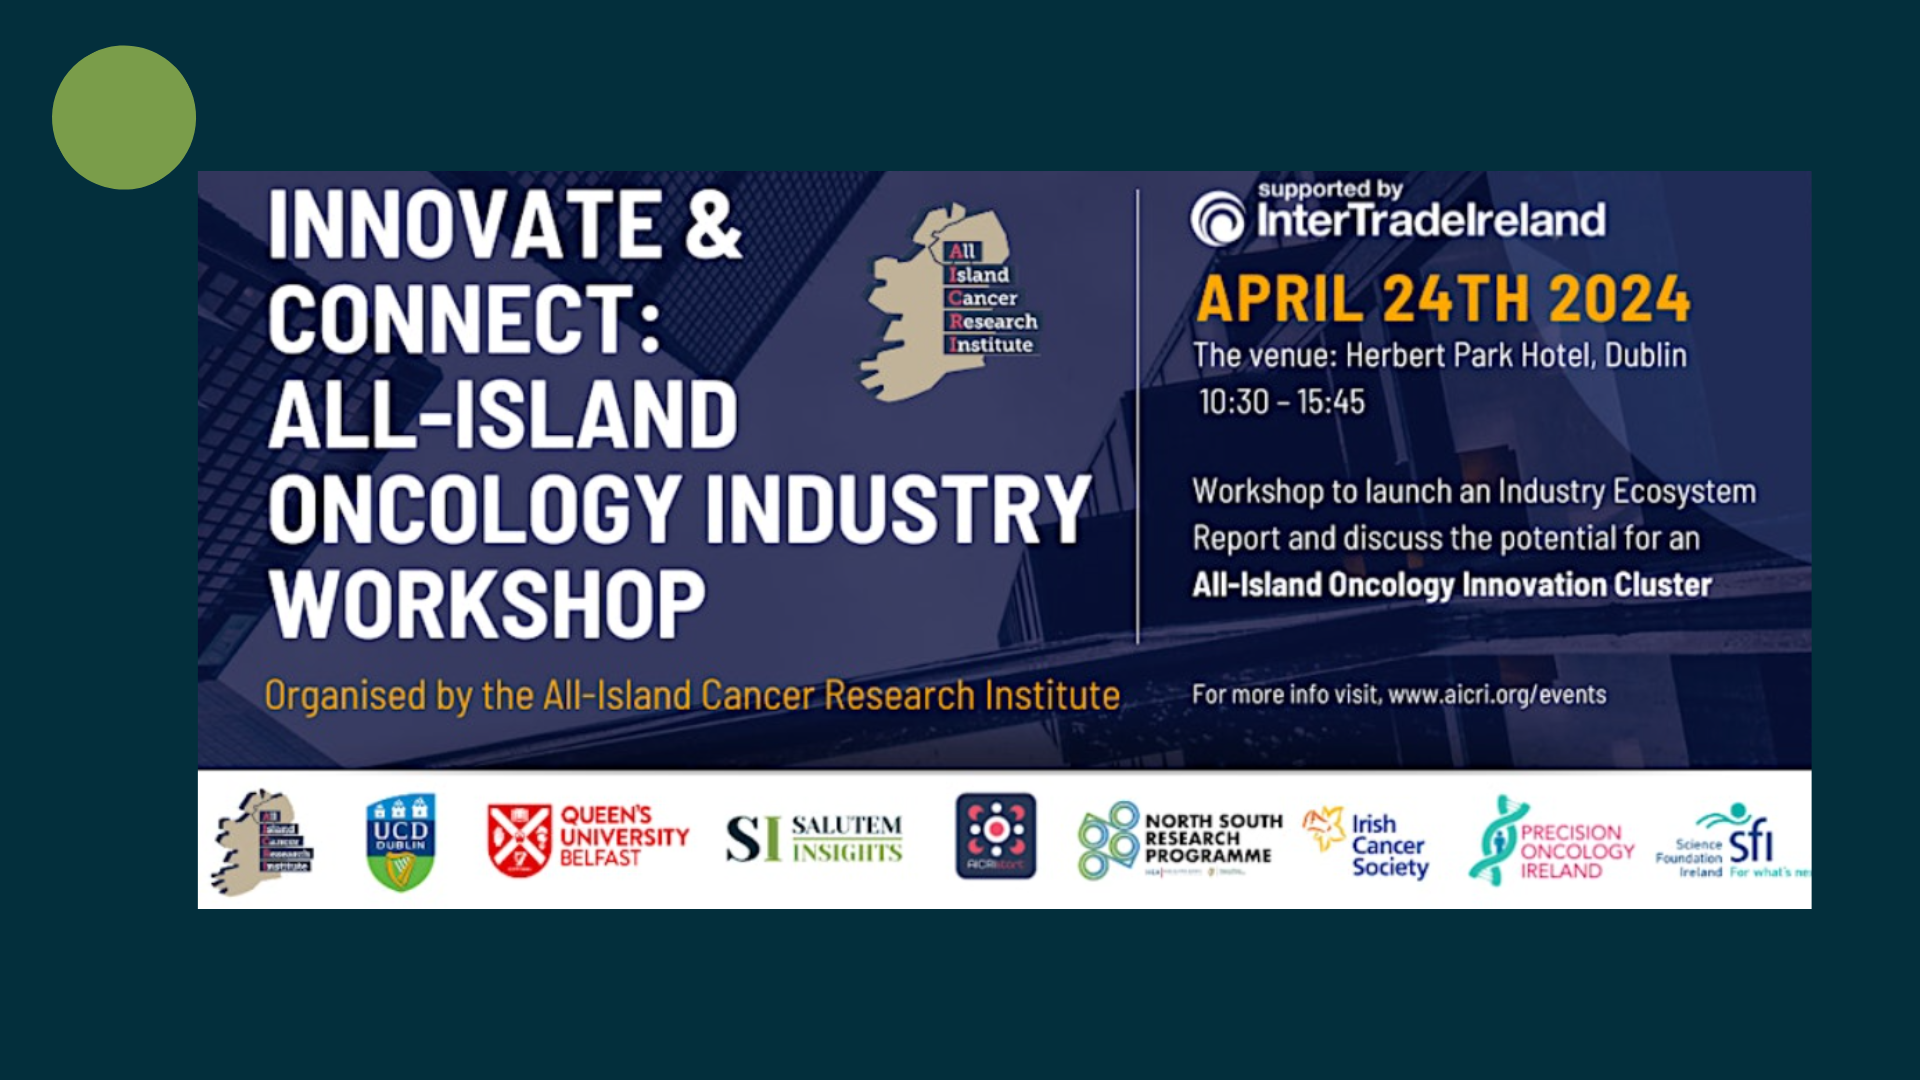 Innovate & Connect: All-Island Oncology Industry Workshop - Salutem Insights Participation